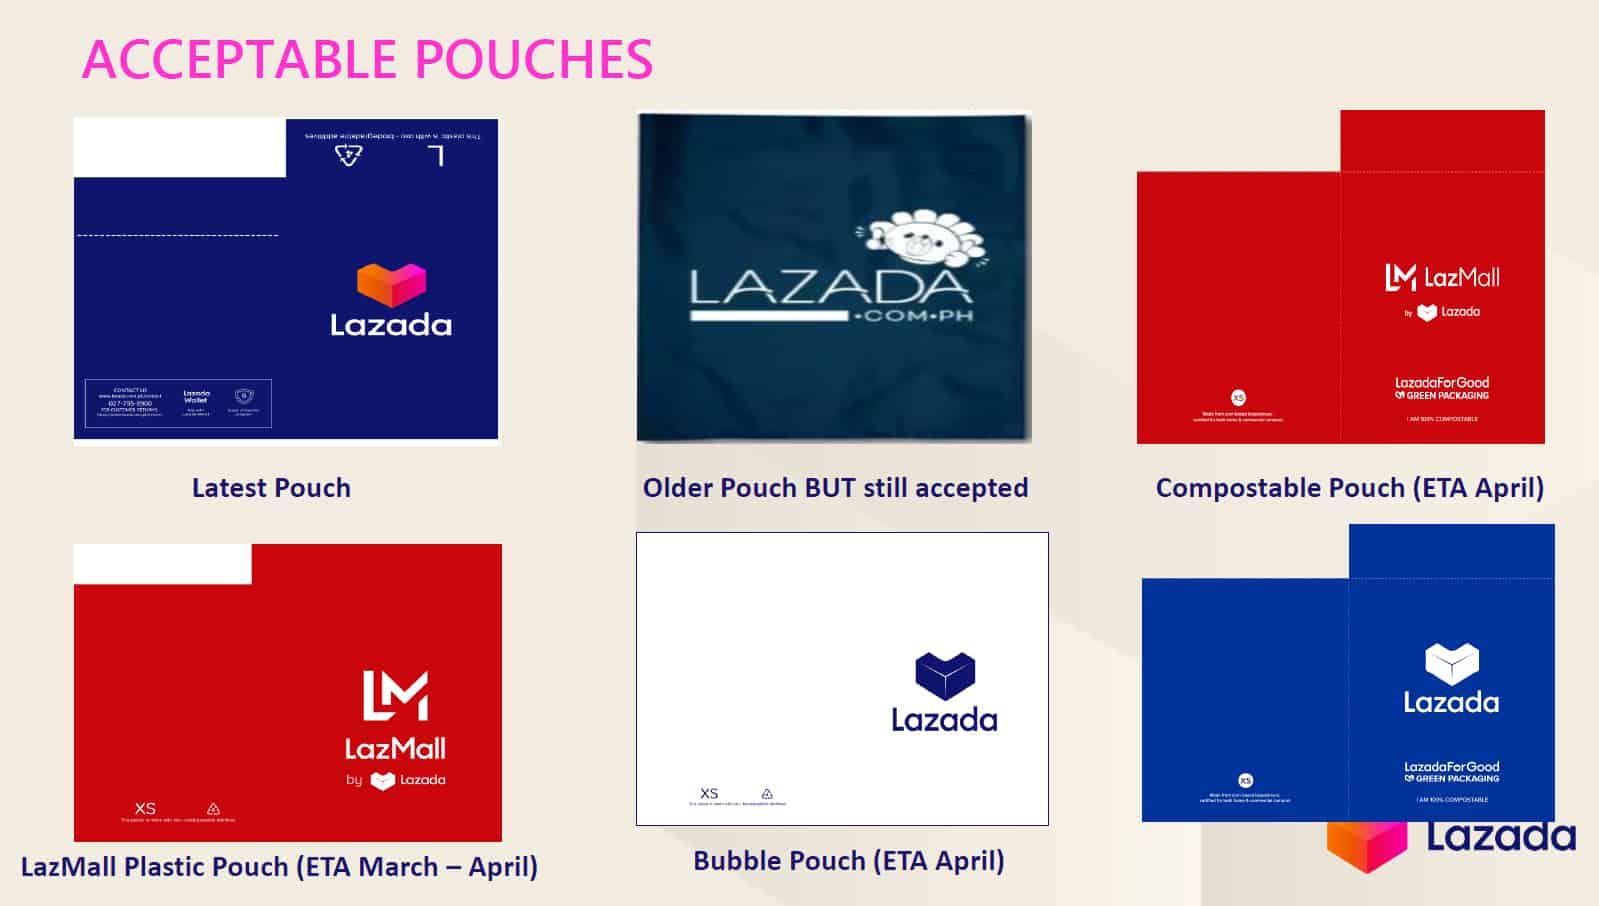 laszada drop off pouches from grandson travel and tours